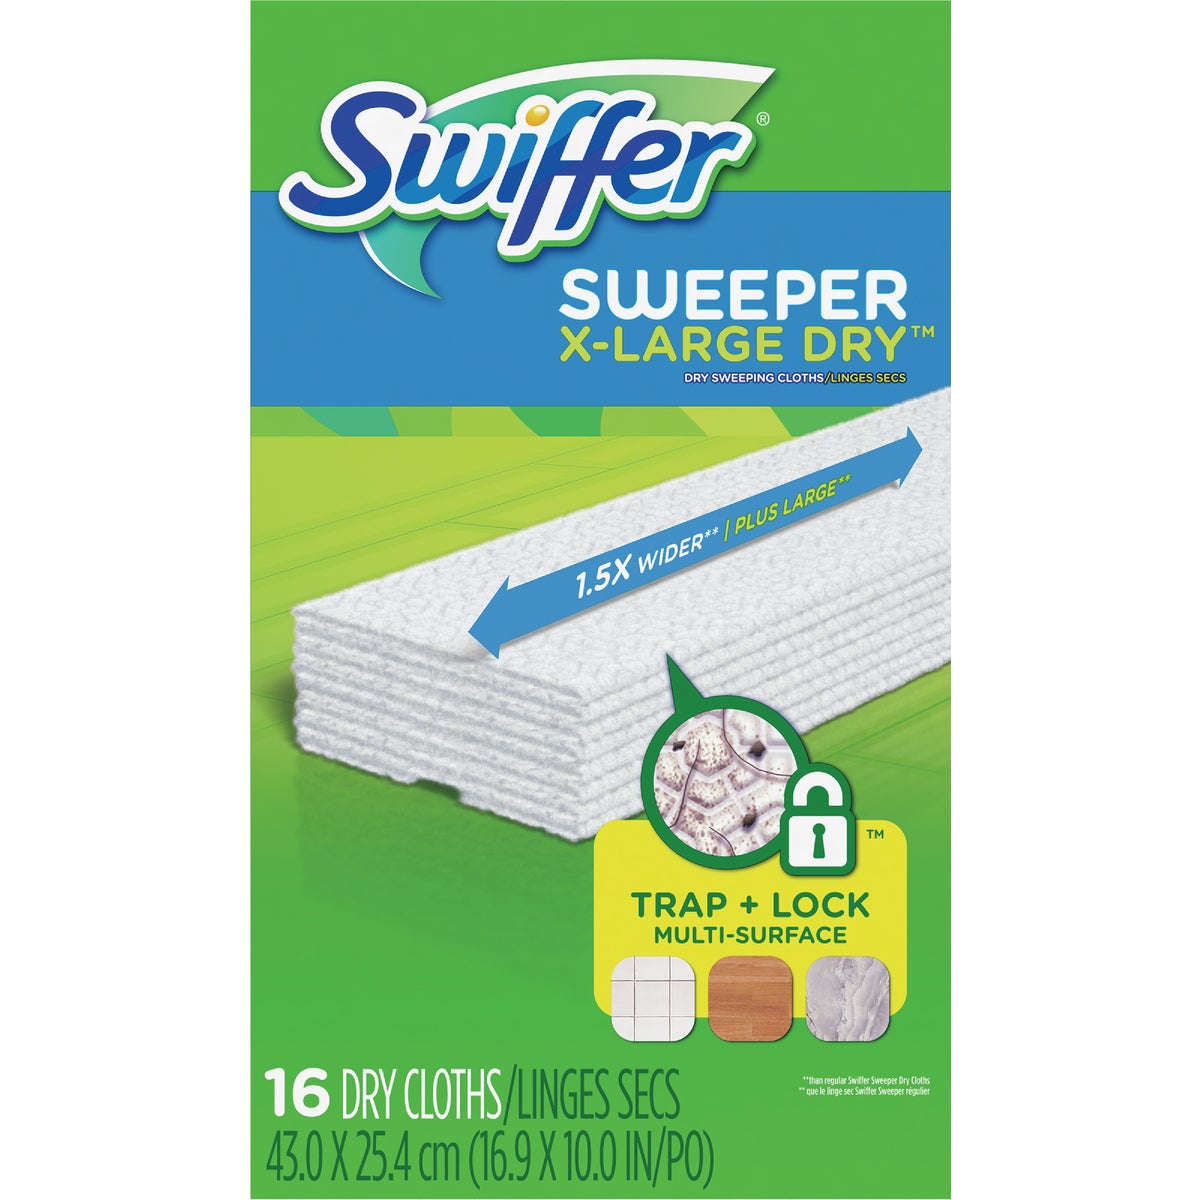 Item 602353, Replacement cloths for Swiffer Max starter kit.